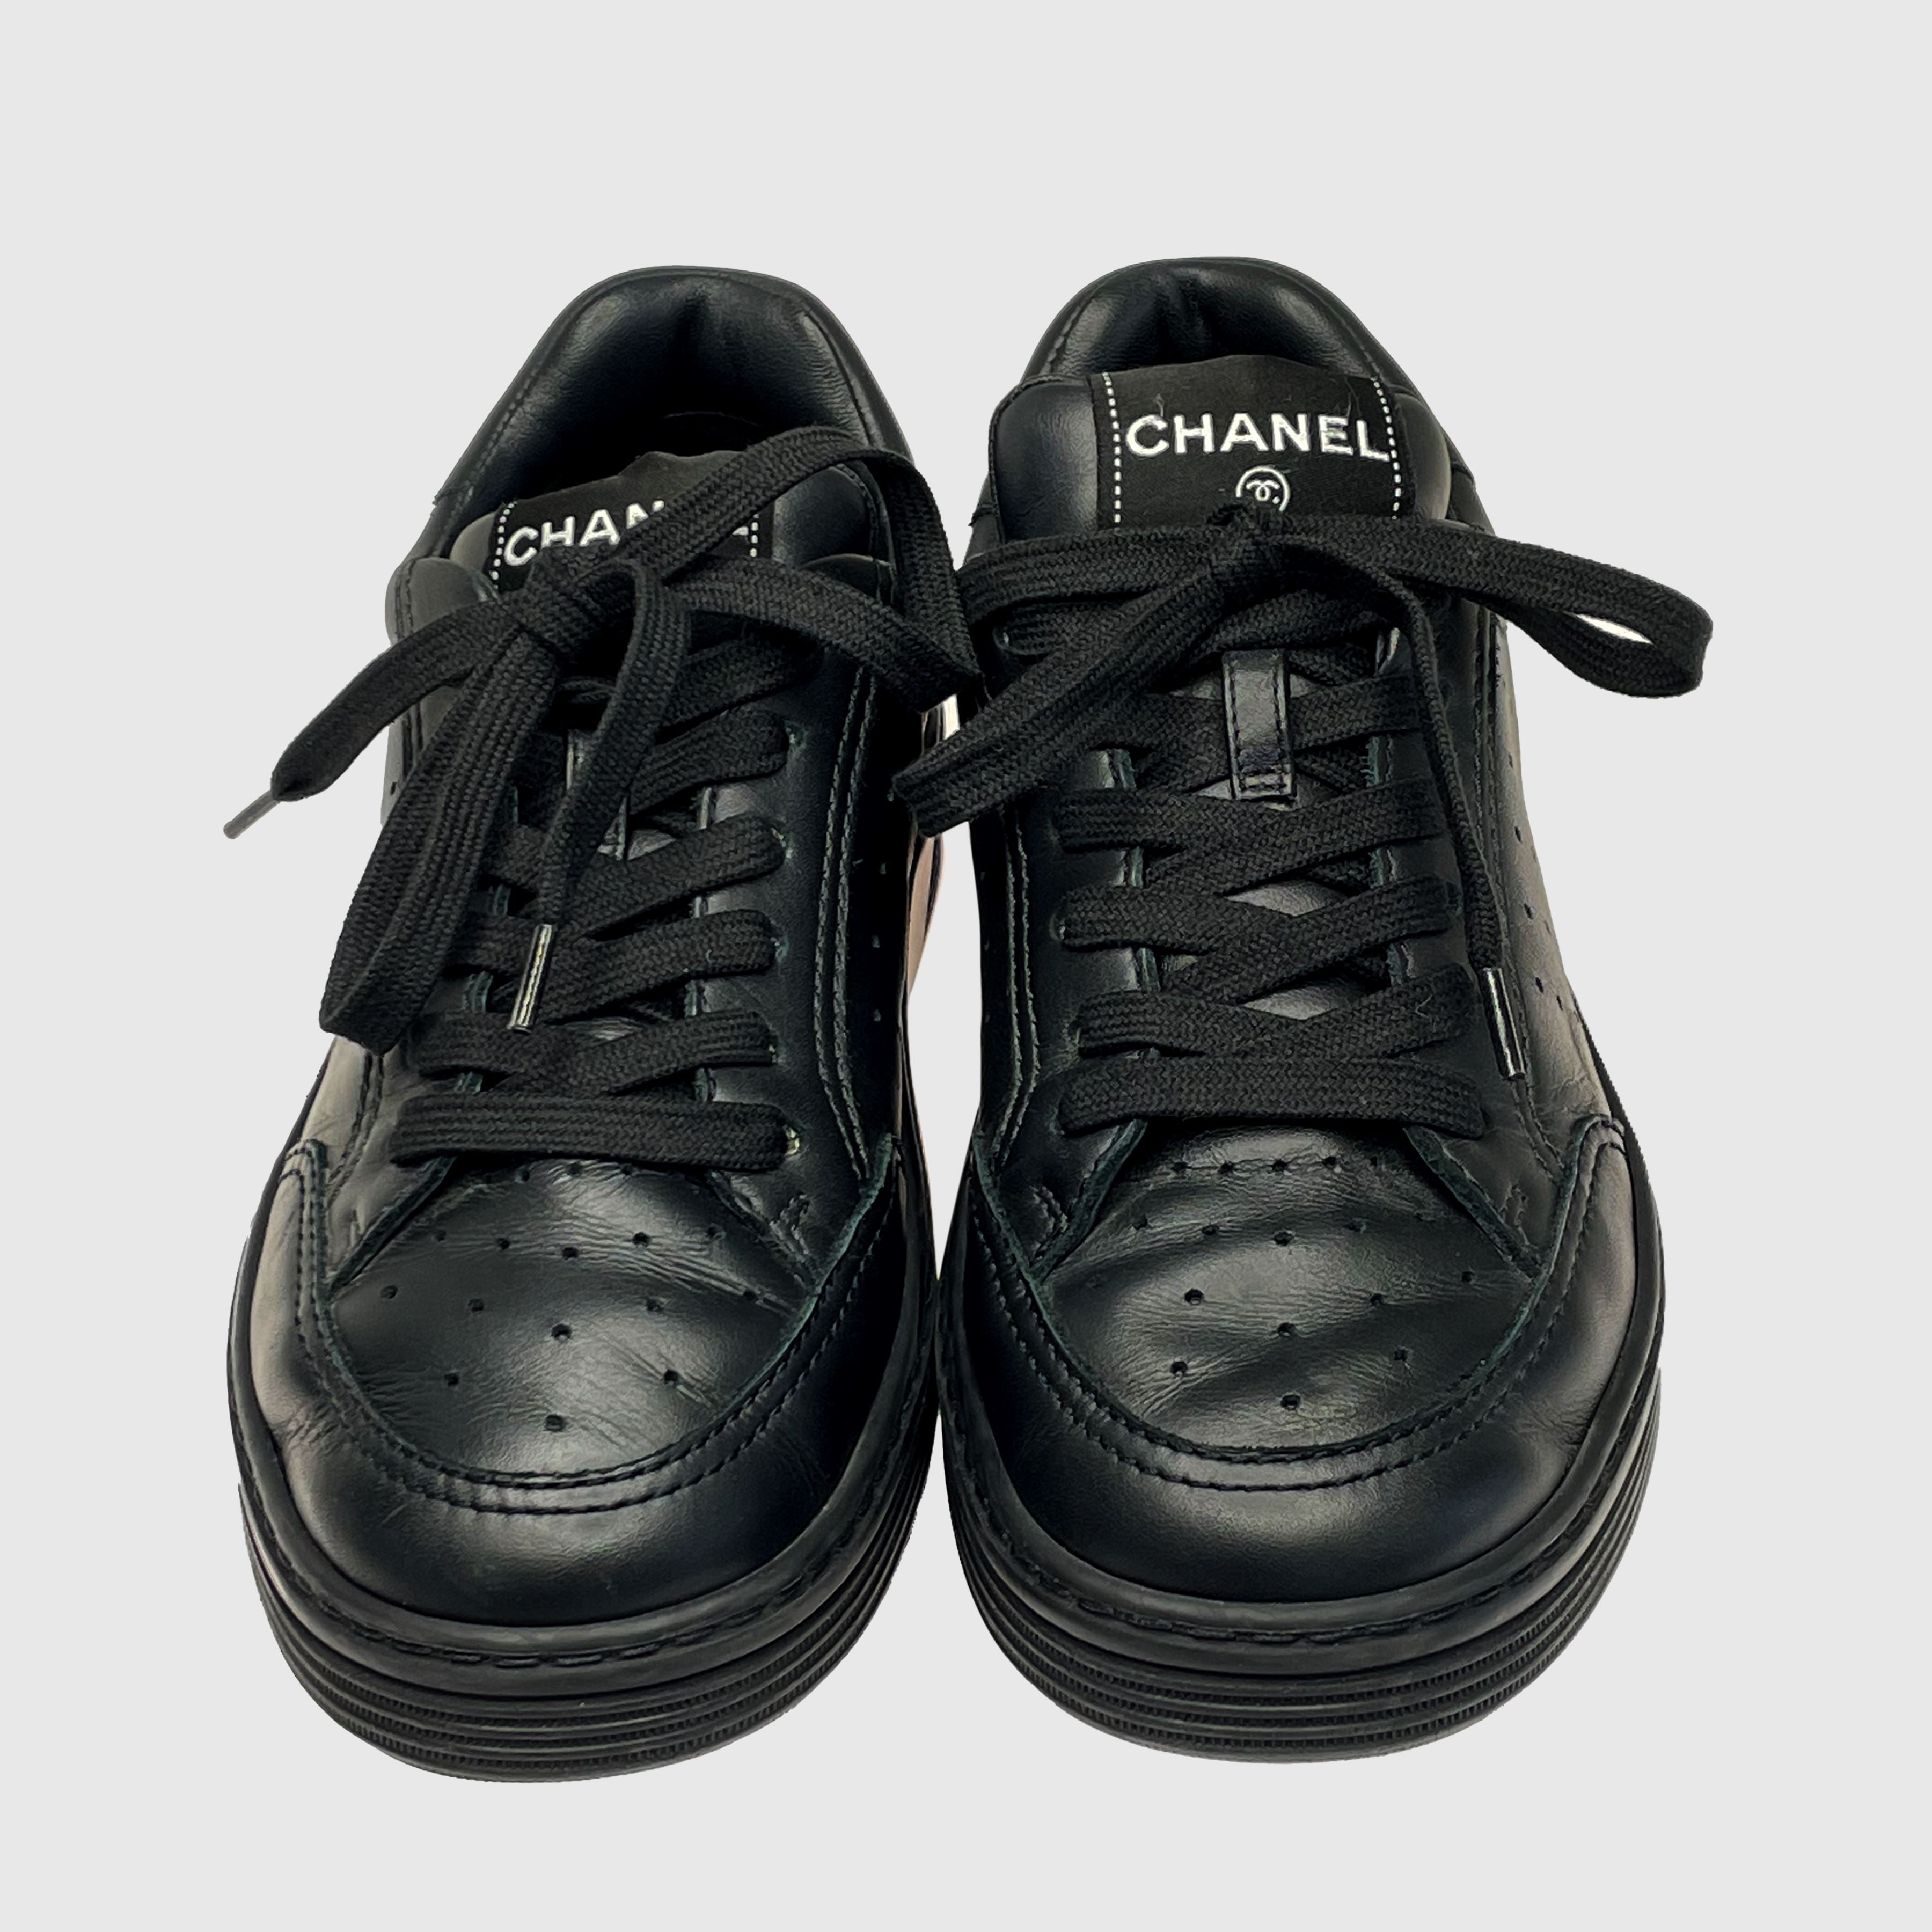 Black Perforated Sneakers Shoes Chanel 